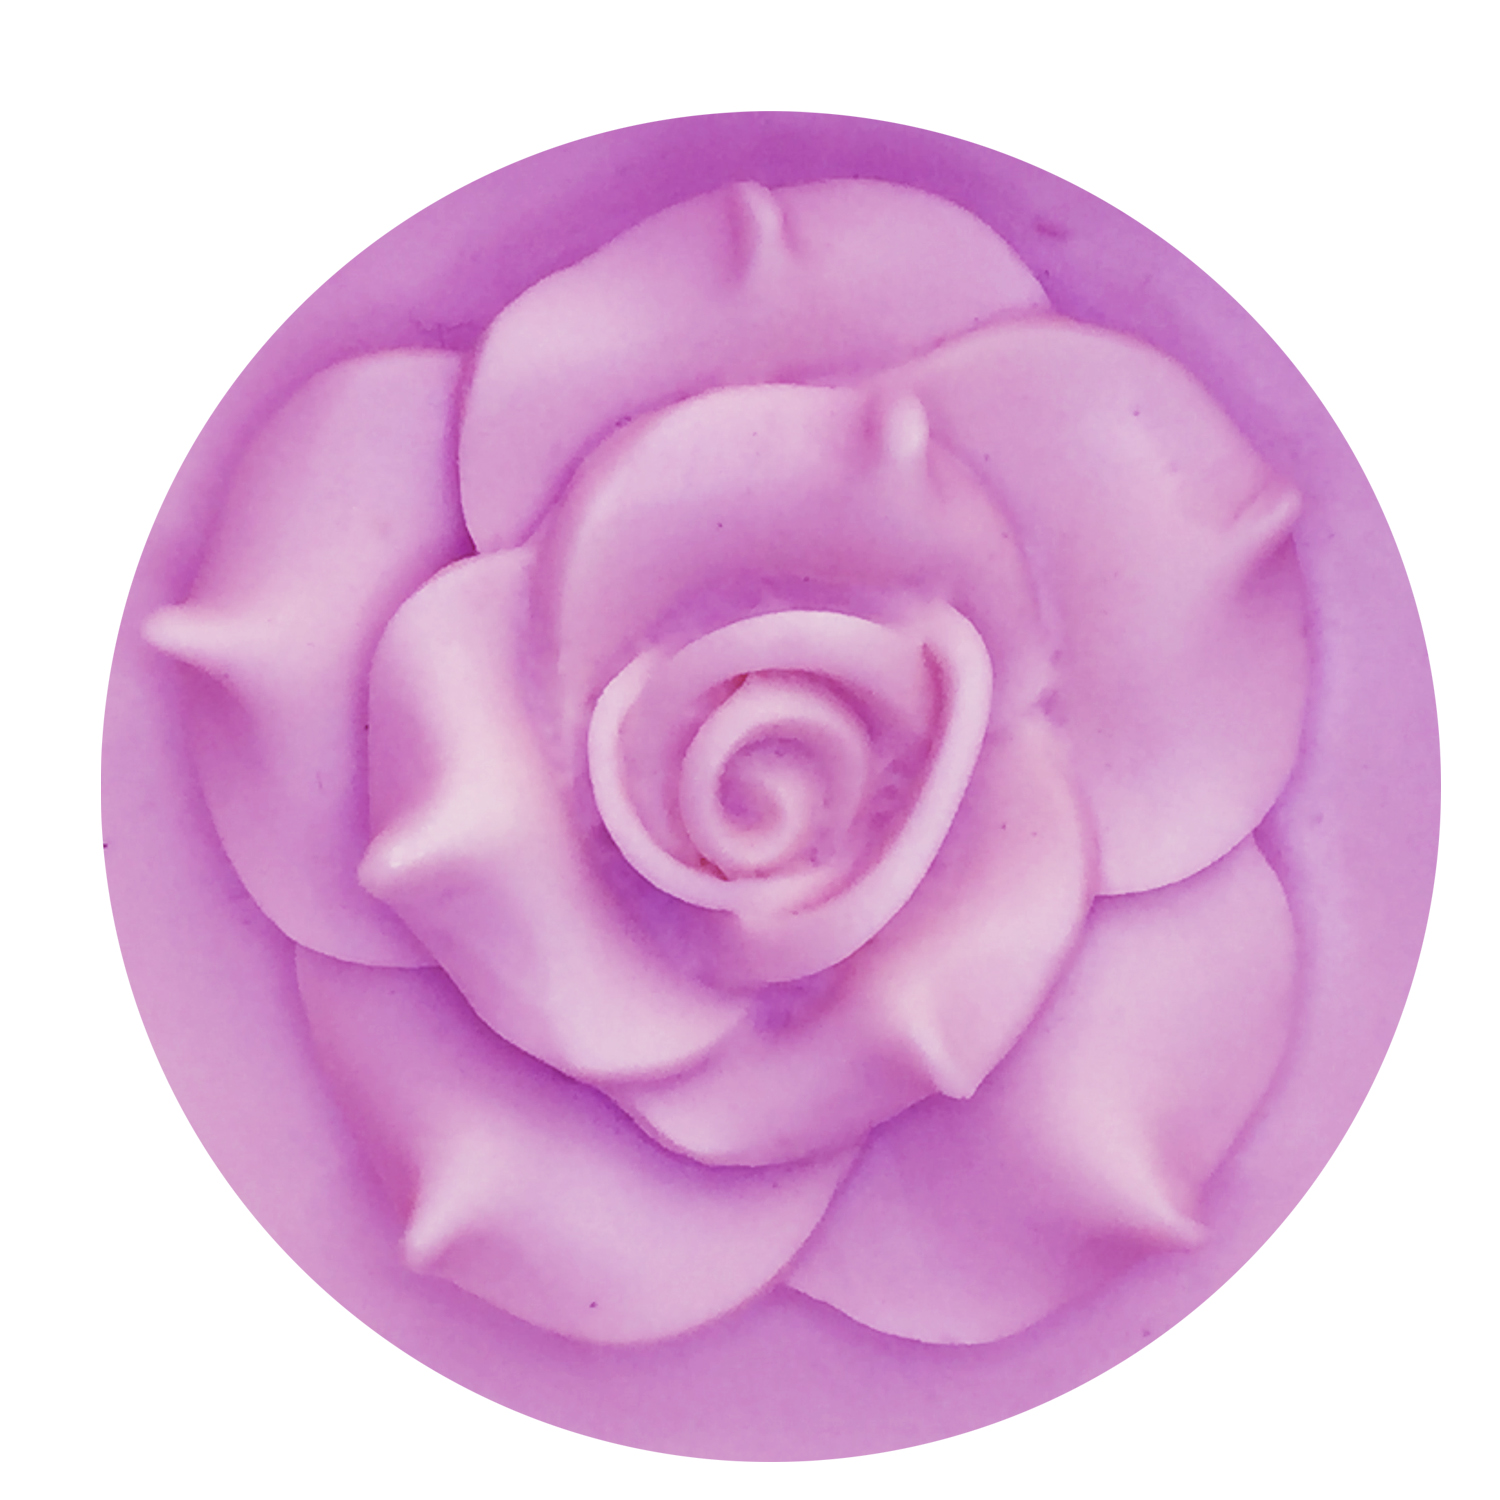 M0351 3D Rose Flower Silicone Mold Fondant Gift Decorating Chocolate Cookie Soap Polymer Clay Resin baking molds